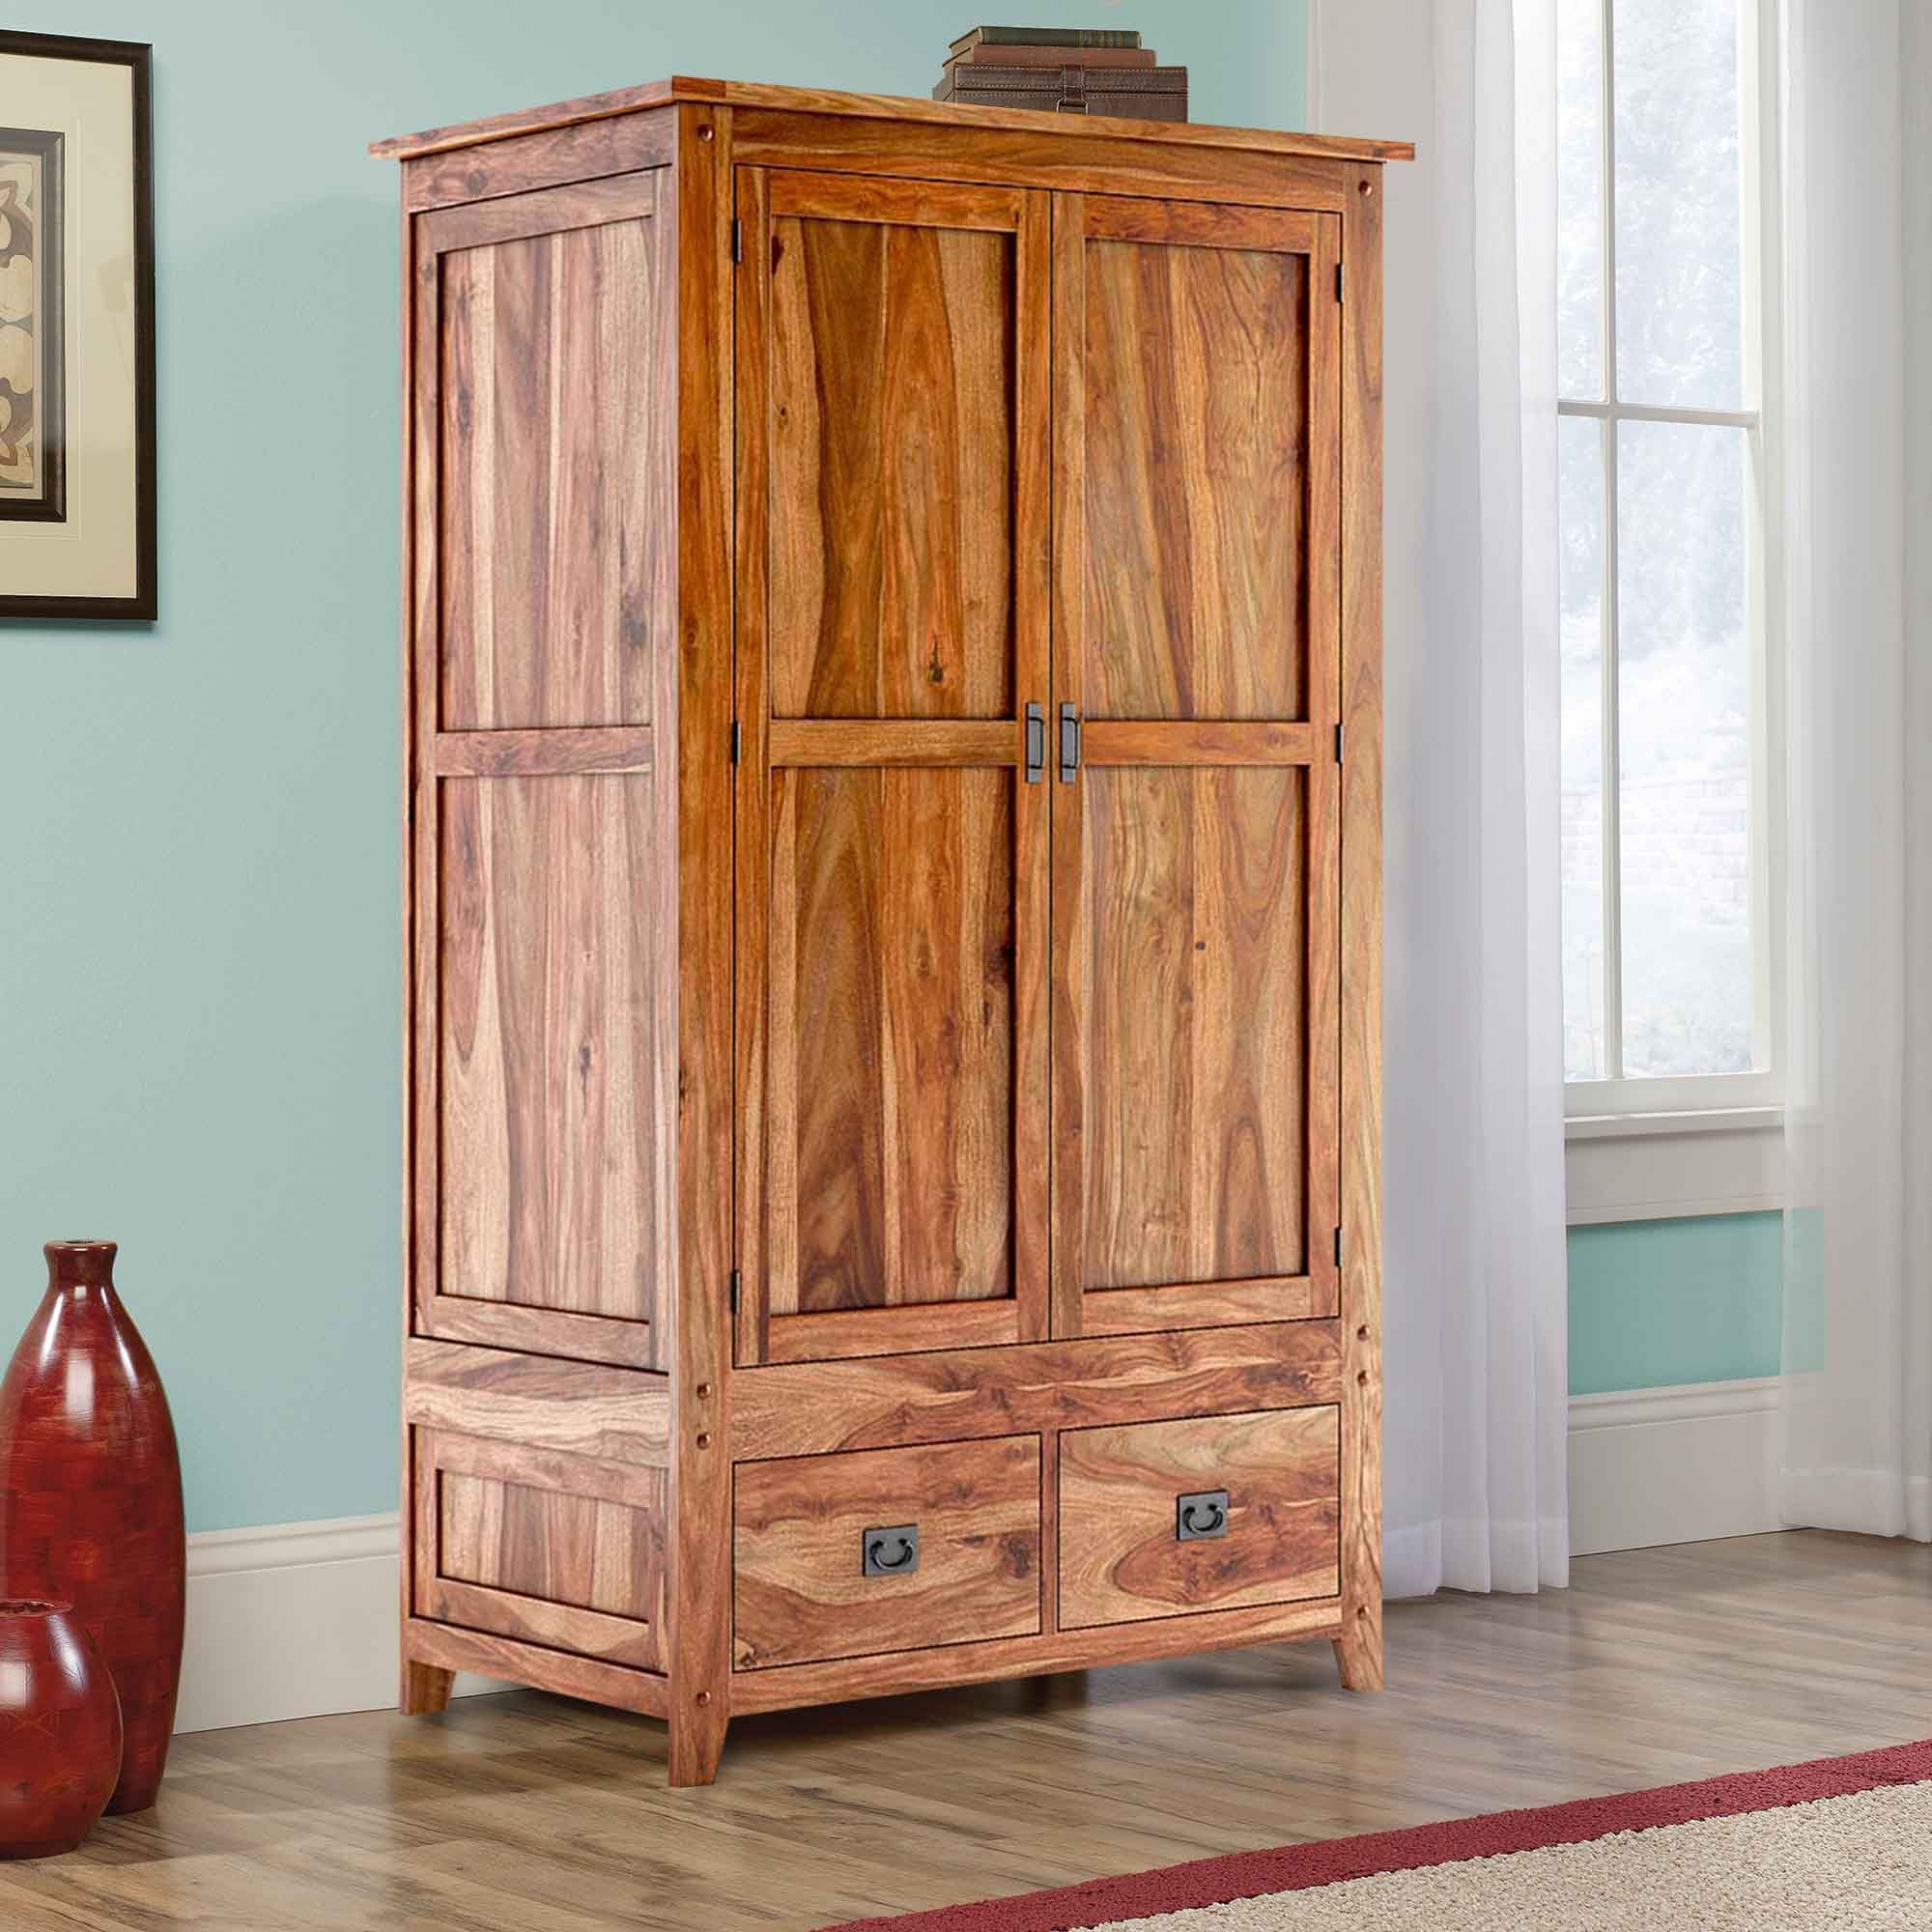 Delaware Farmhouse Solid Wood Wardrobe Armoire With Drawers Throughout Cheap Wooden Wardrobes (View 3 of 20)